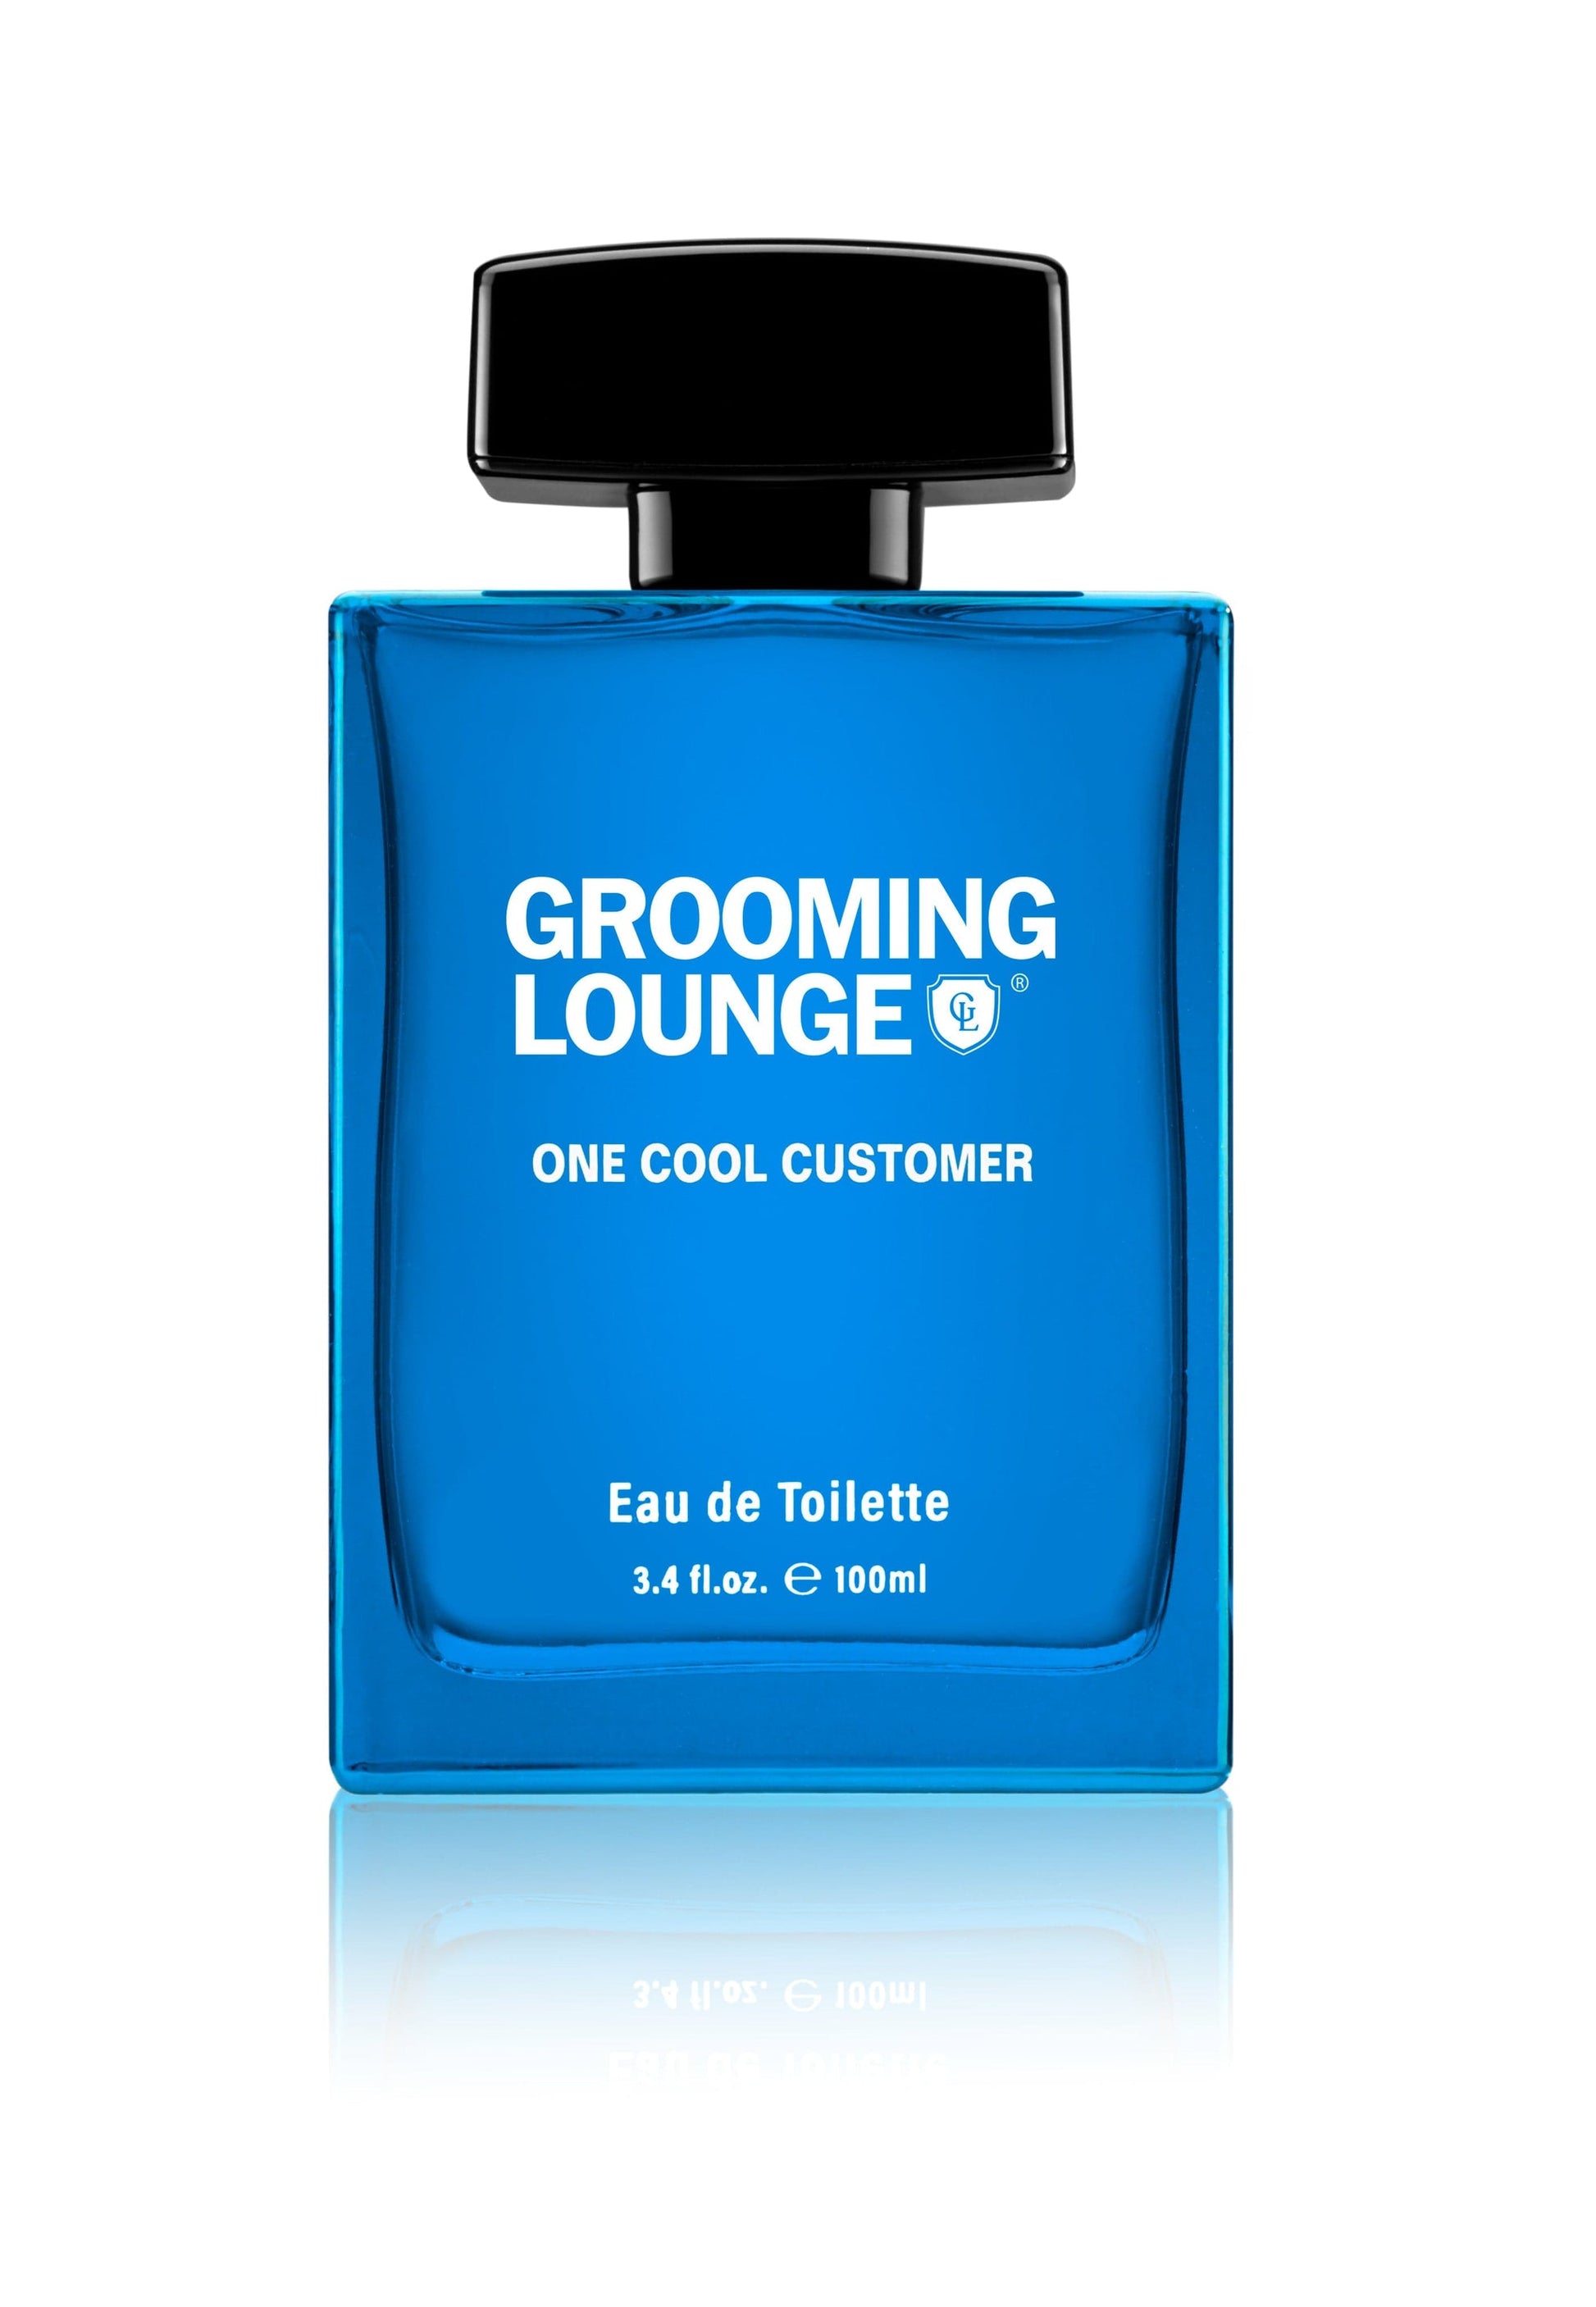 3.4 oz bottle oof grooming lounge's one cool customer EDT